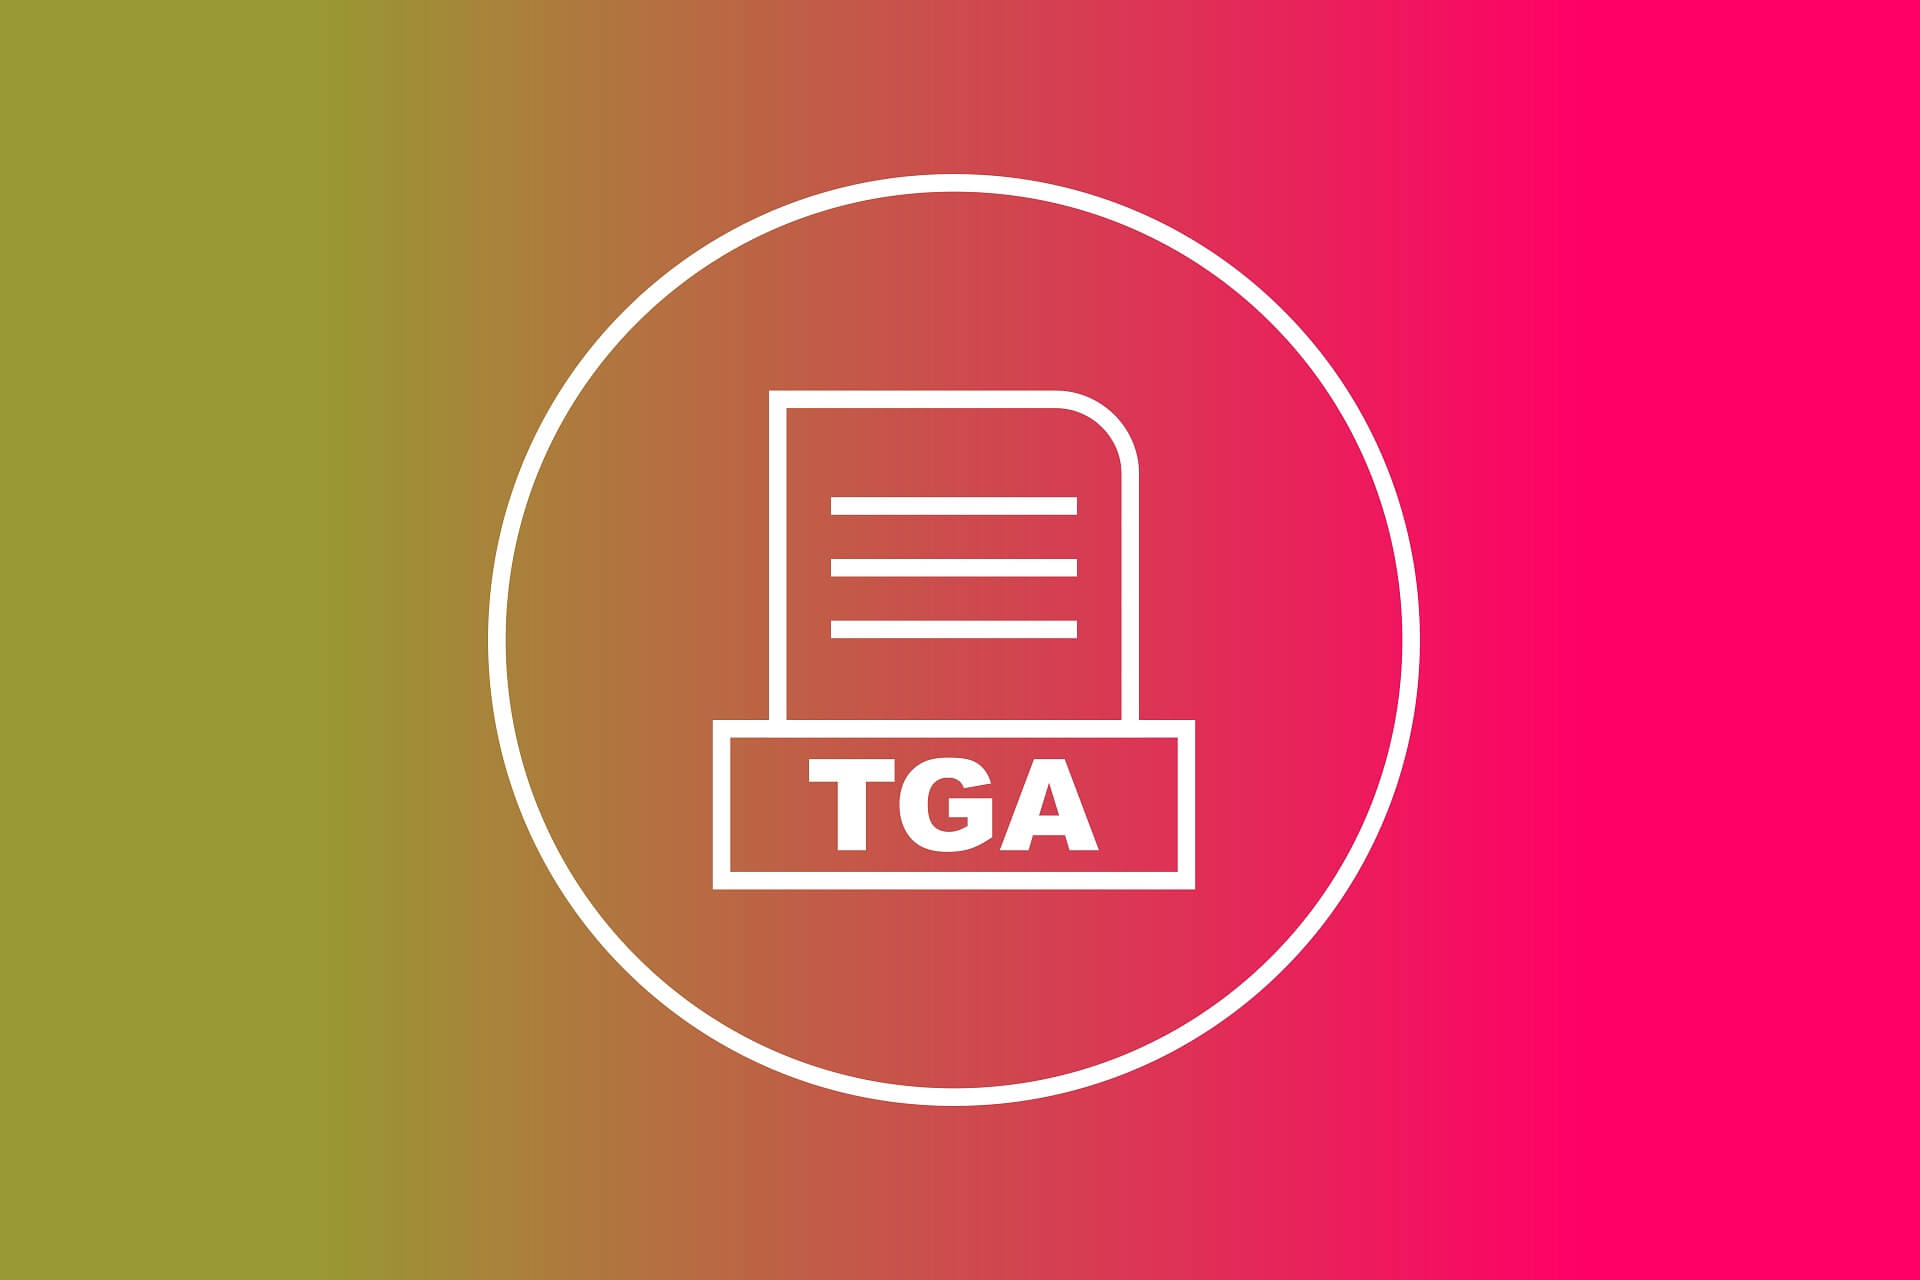 How to open TGA Files